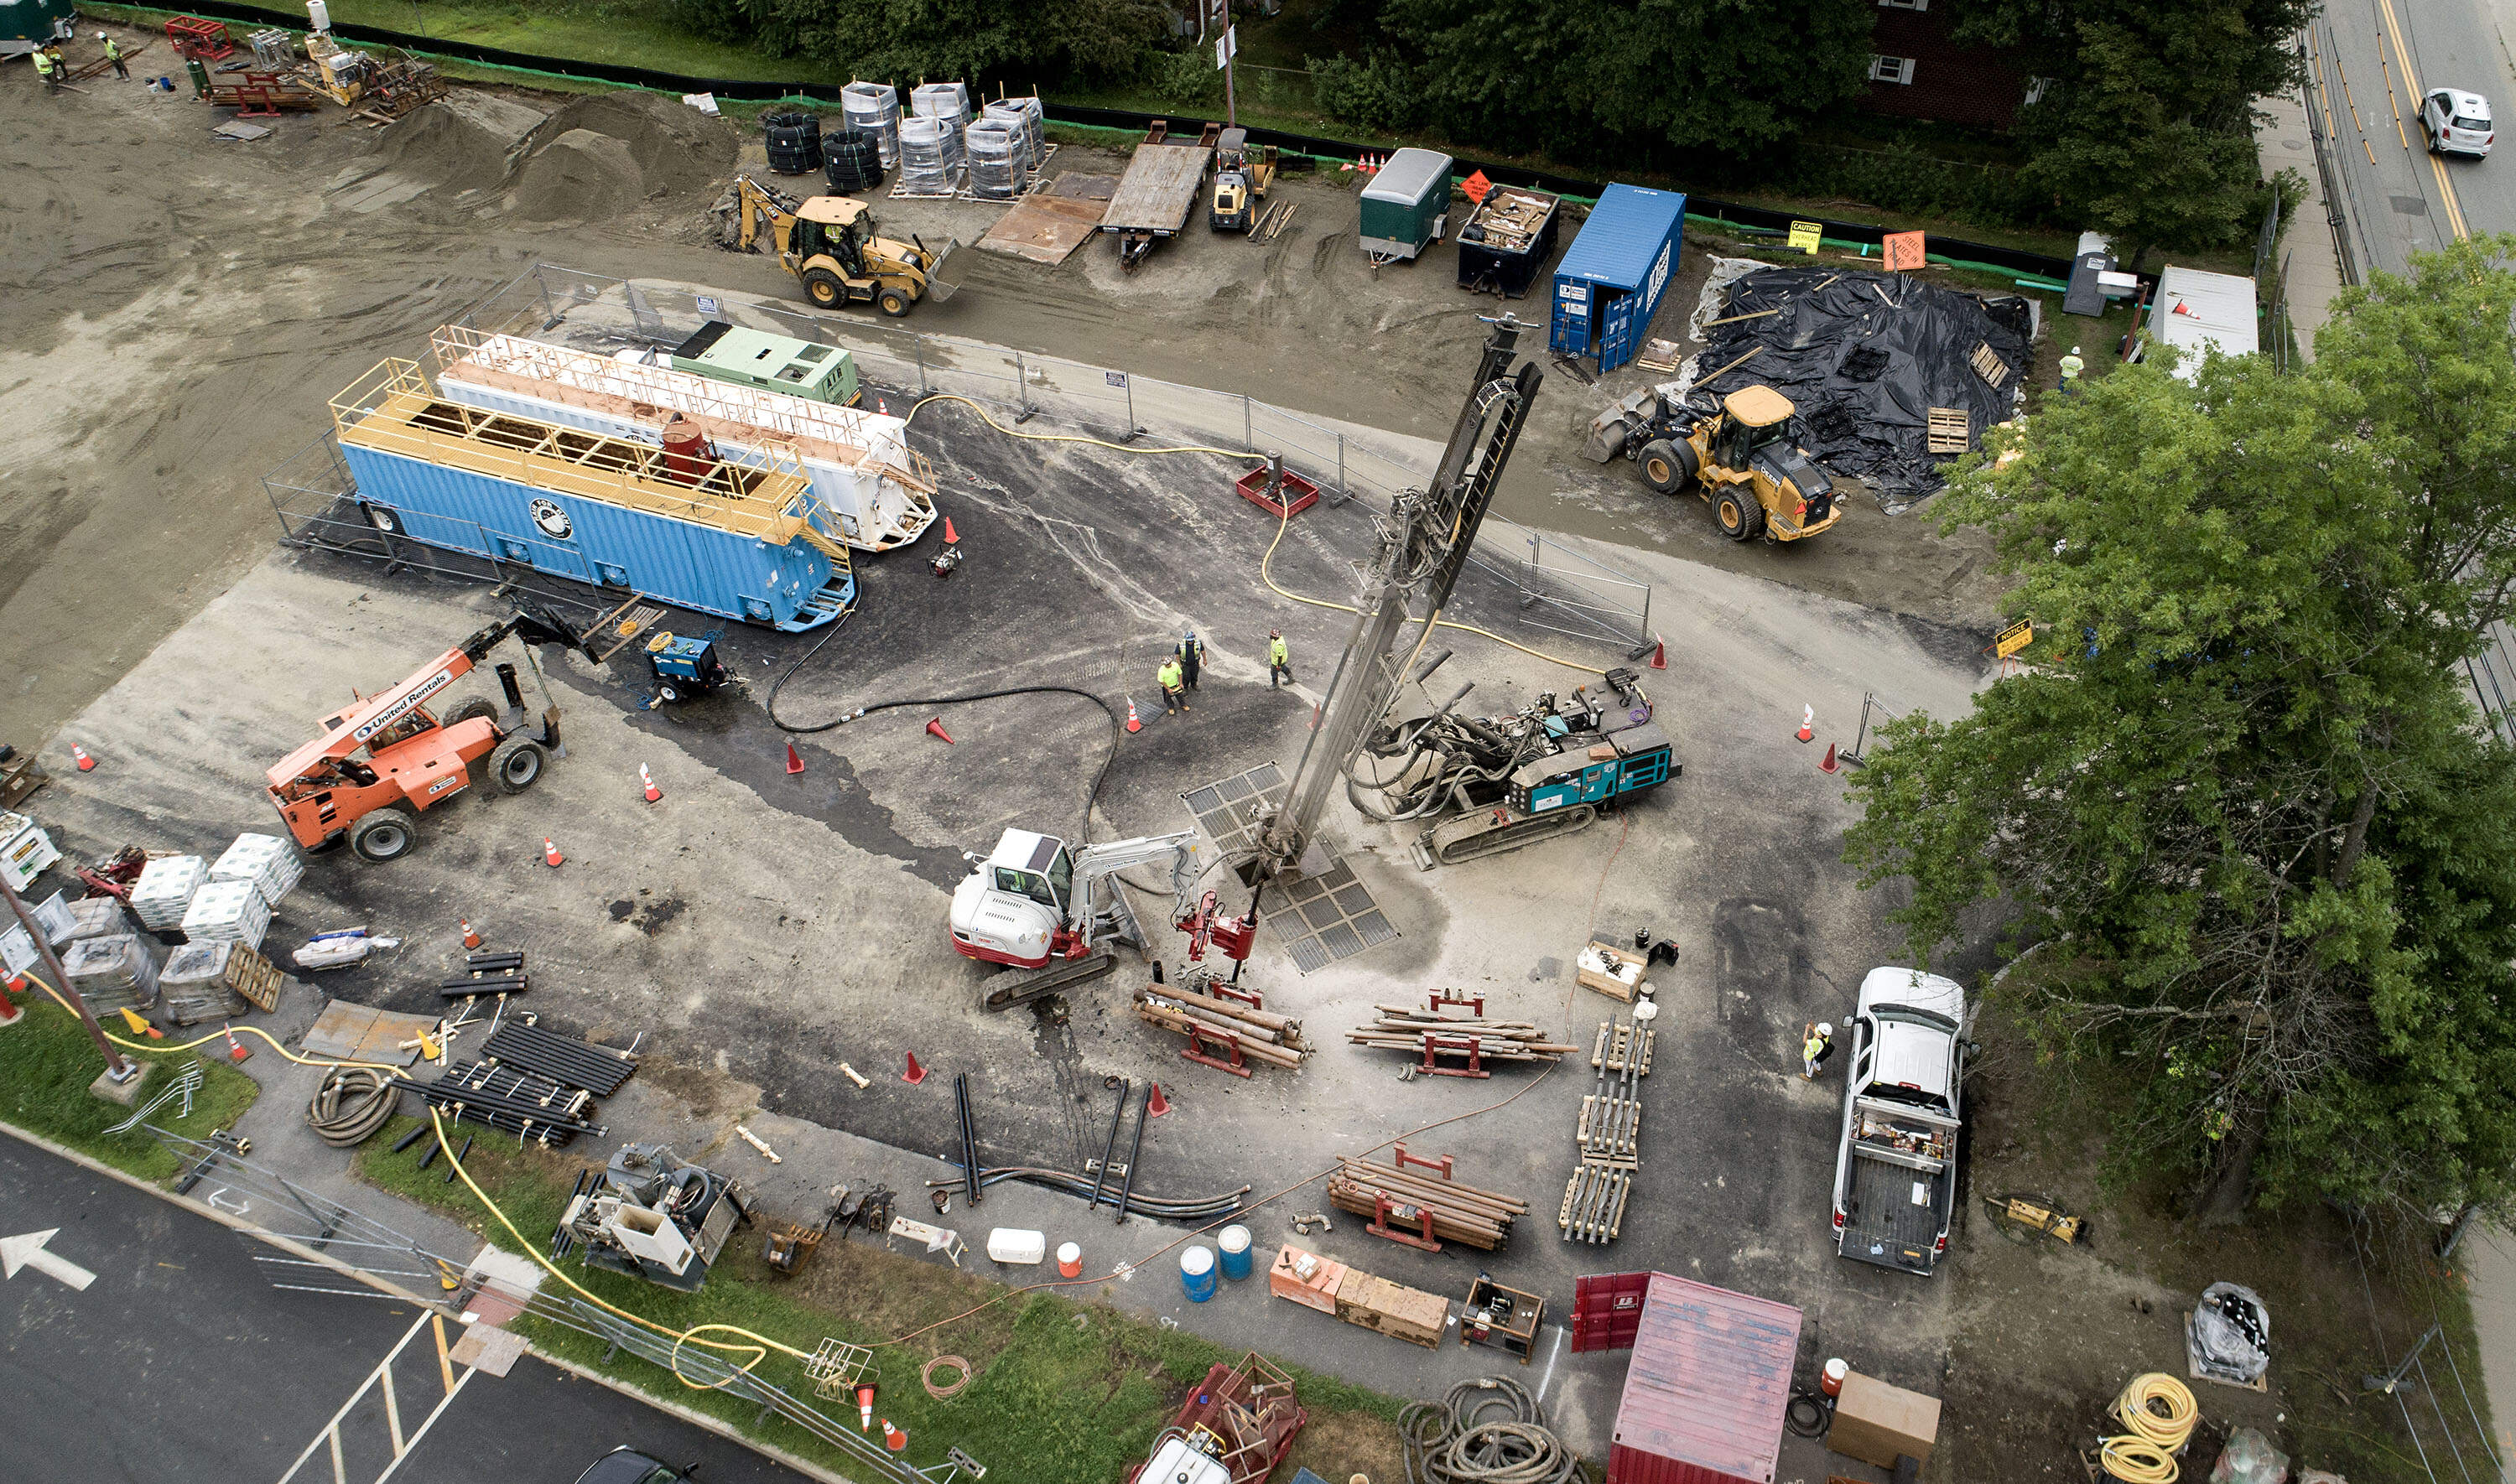 A drill bores geothermal wells for Eversource's networked geothermal pilot project in Framingham. (Robin Lubbock/WBUR)